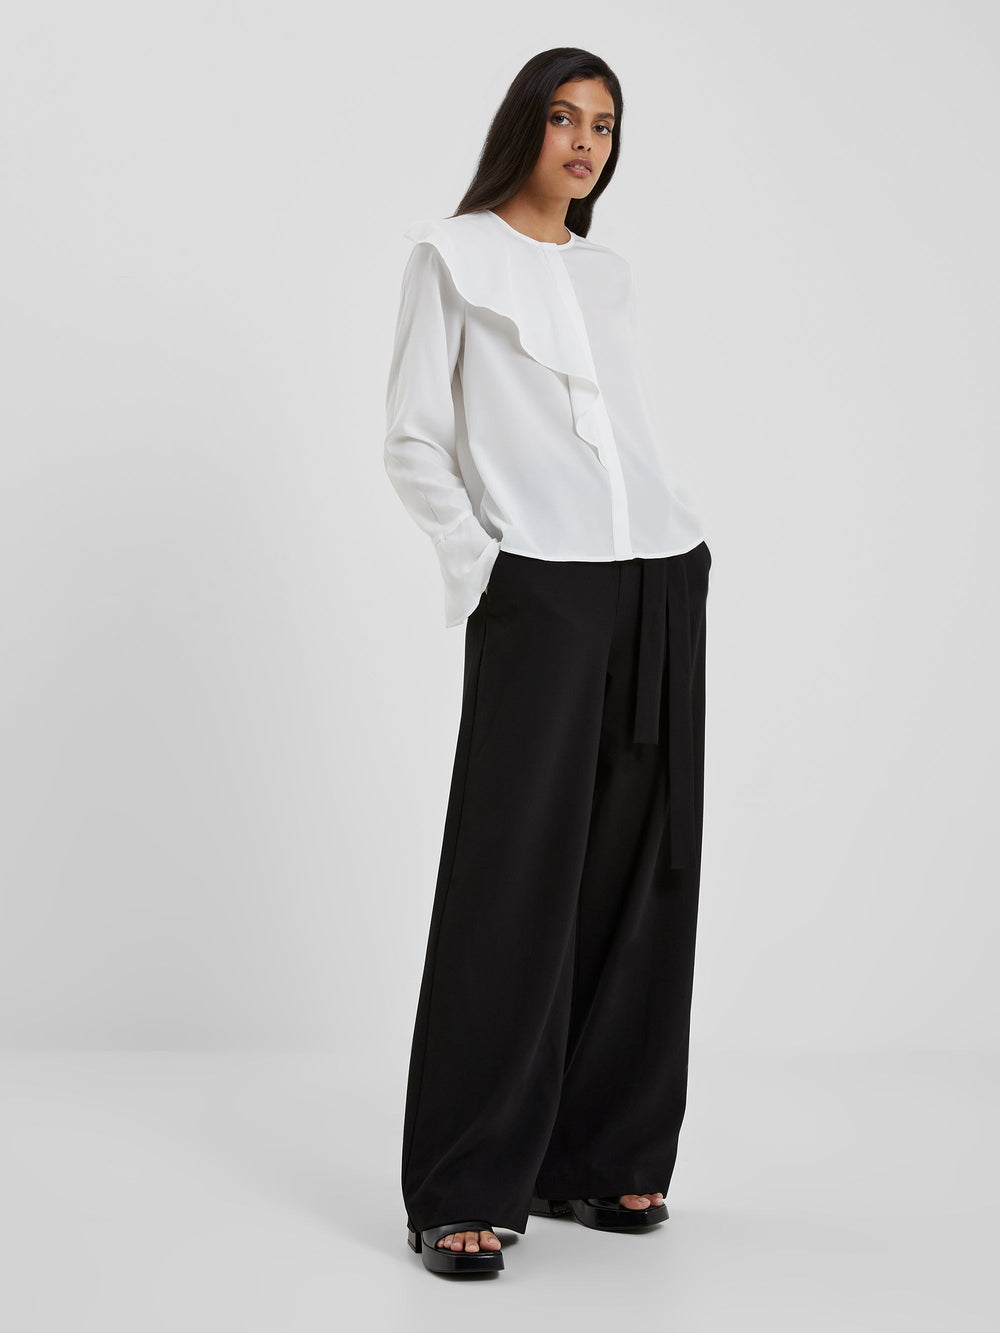 Crepe Light Recycled Asymmetric Frill Shirt | French Connection EU